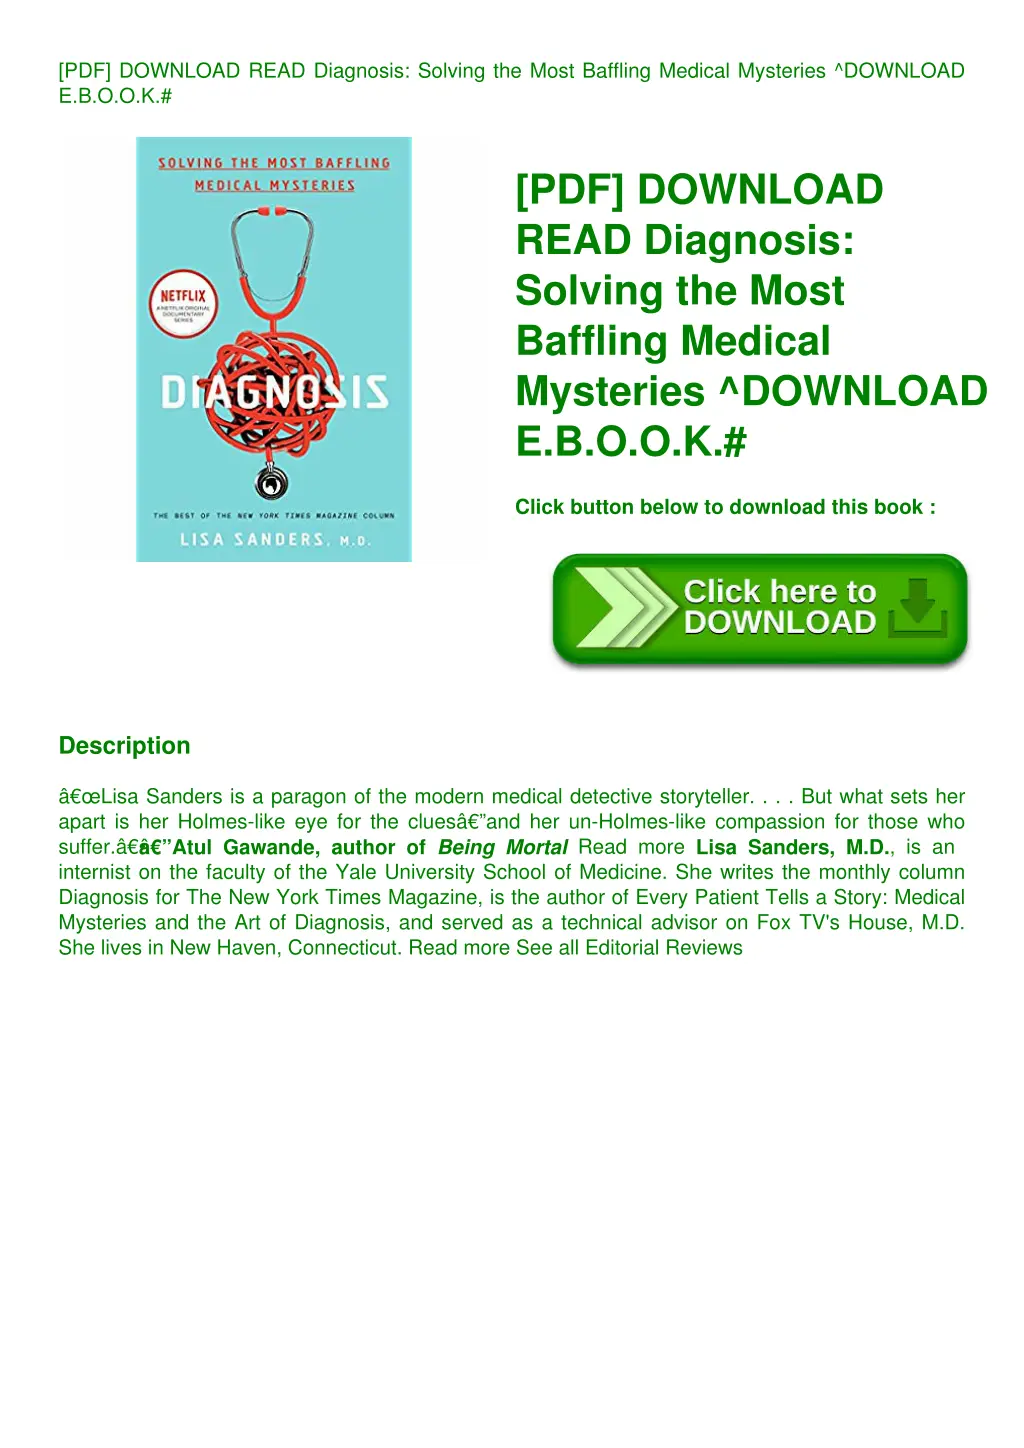 pdf download read diagnosis solving the most n.